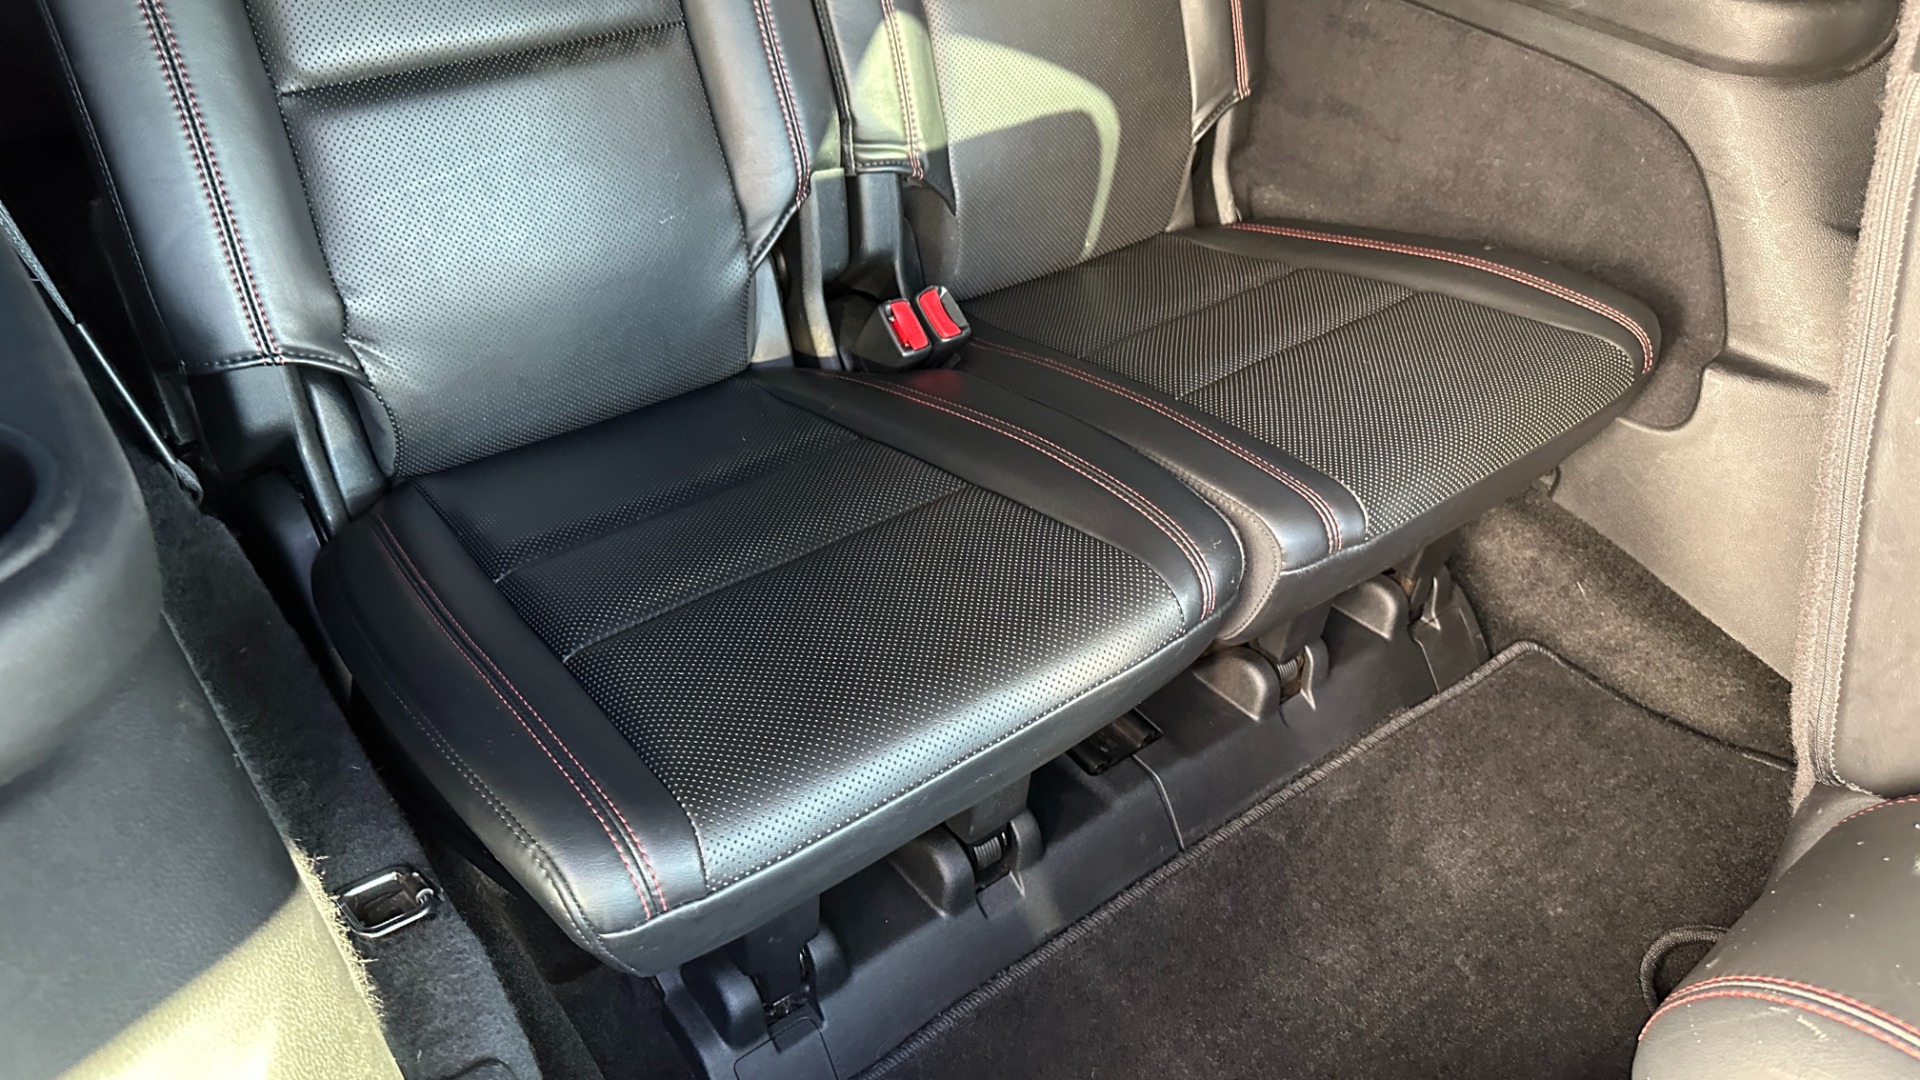 Used 2015 Dodge Durango R/T / HEMI V8 / CAPTAINS CHAIRS / 3 ROW SEATING / TECH PKG / NAPPA LEATHER  for sale $23,995 at Formula Imports in Charlotte NC 28227 38